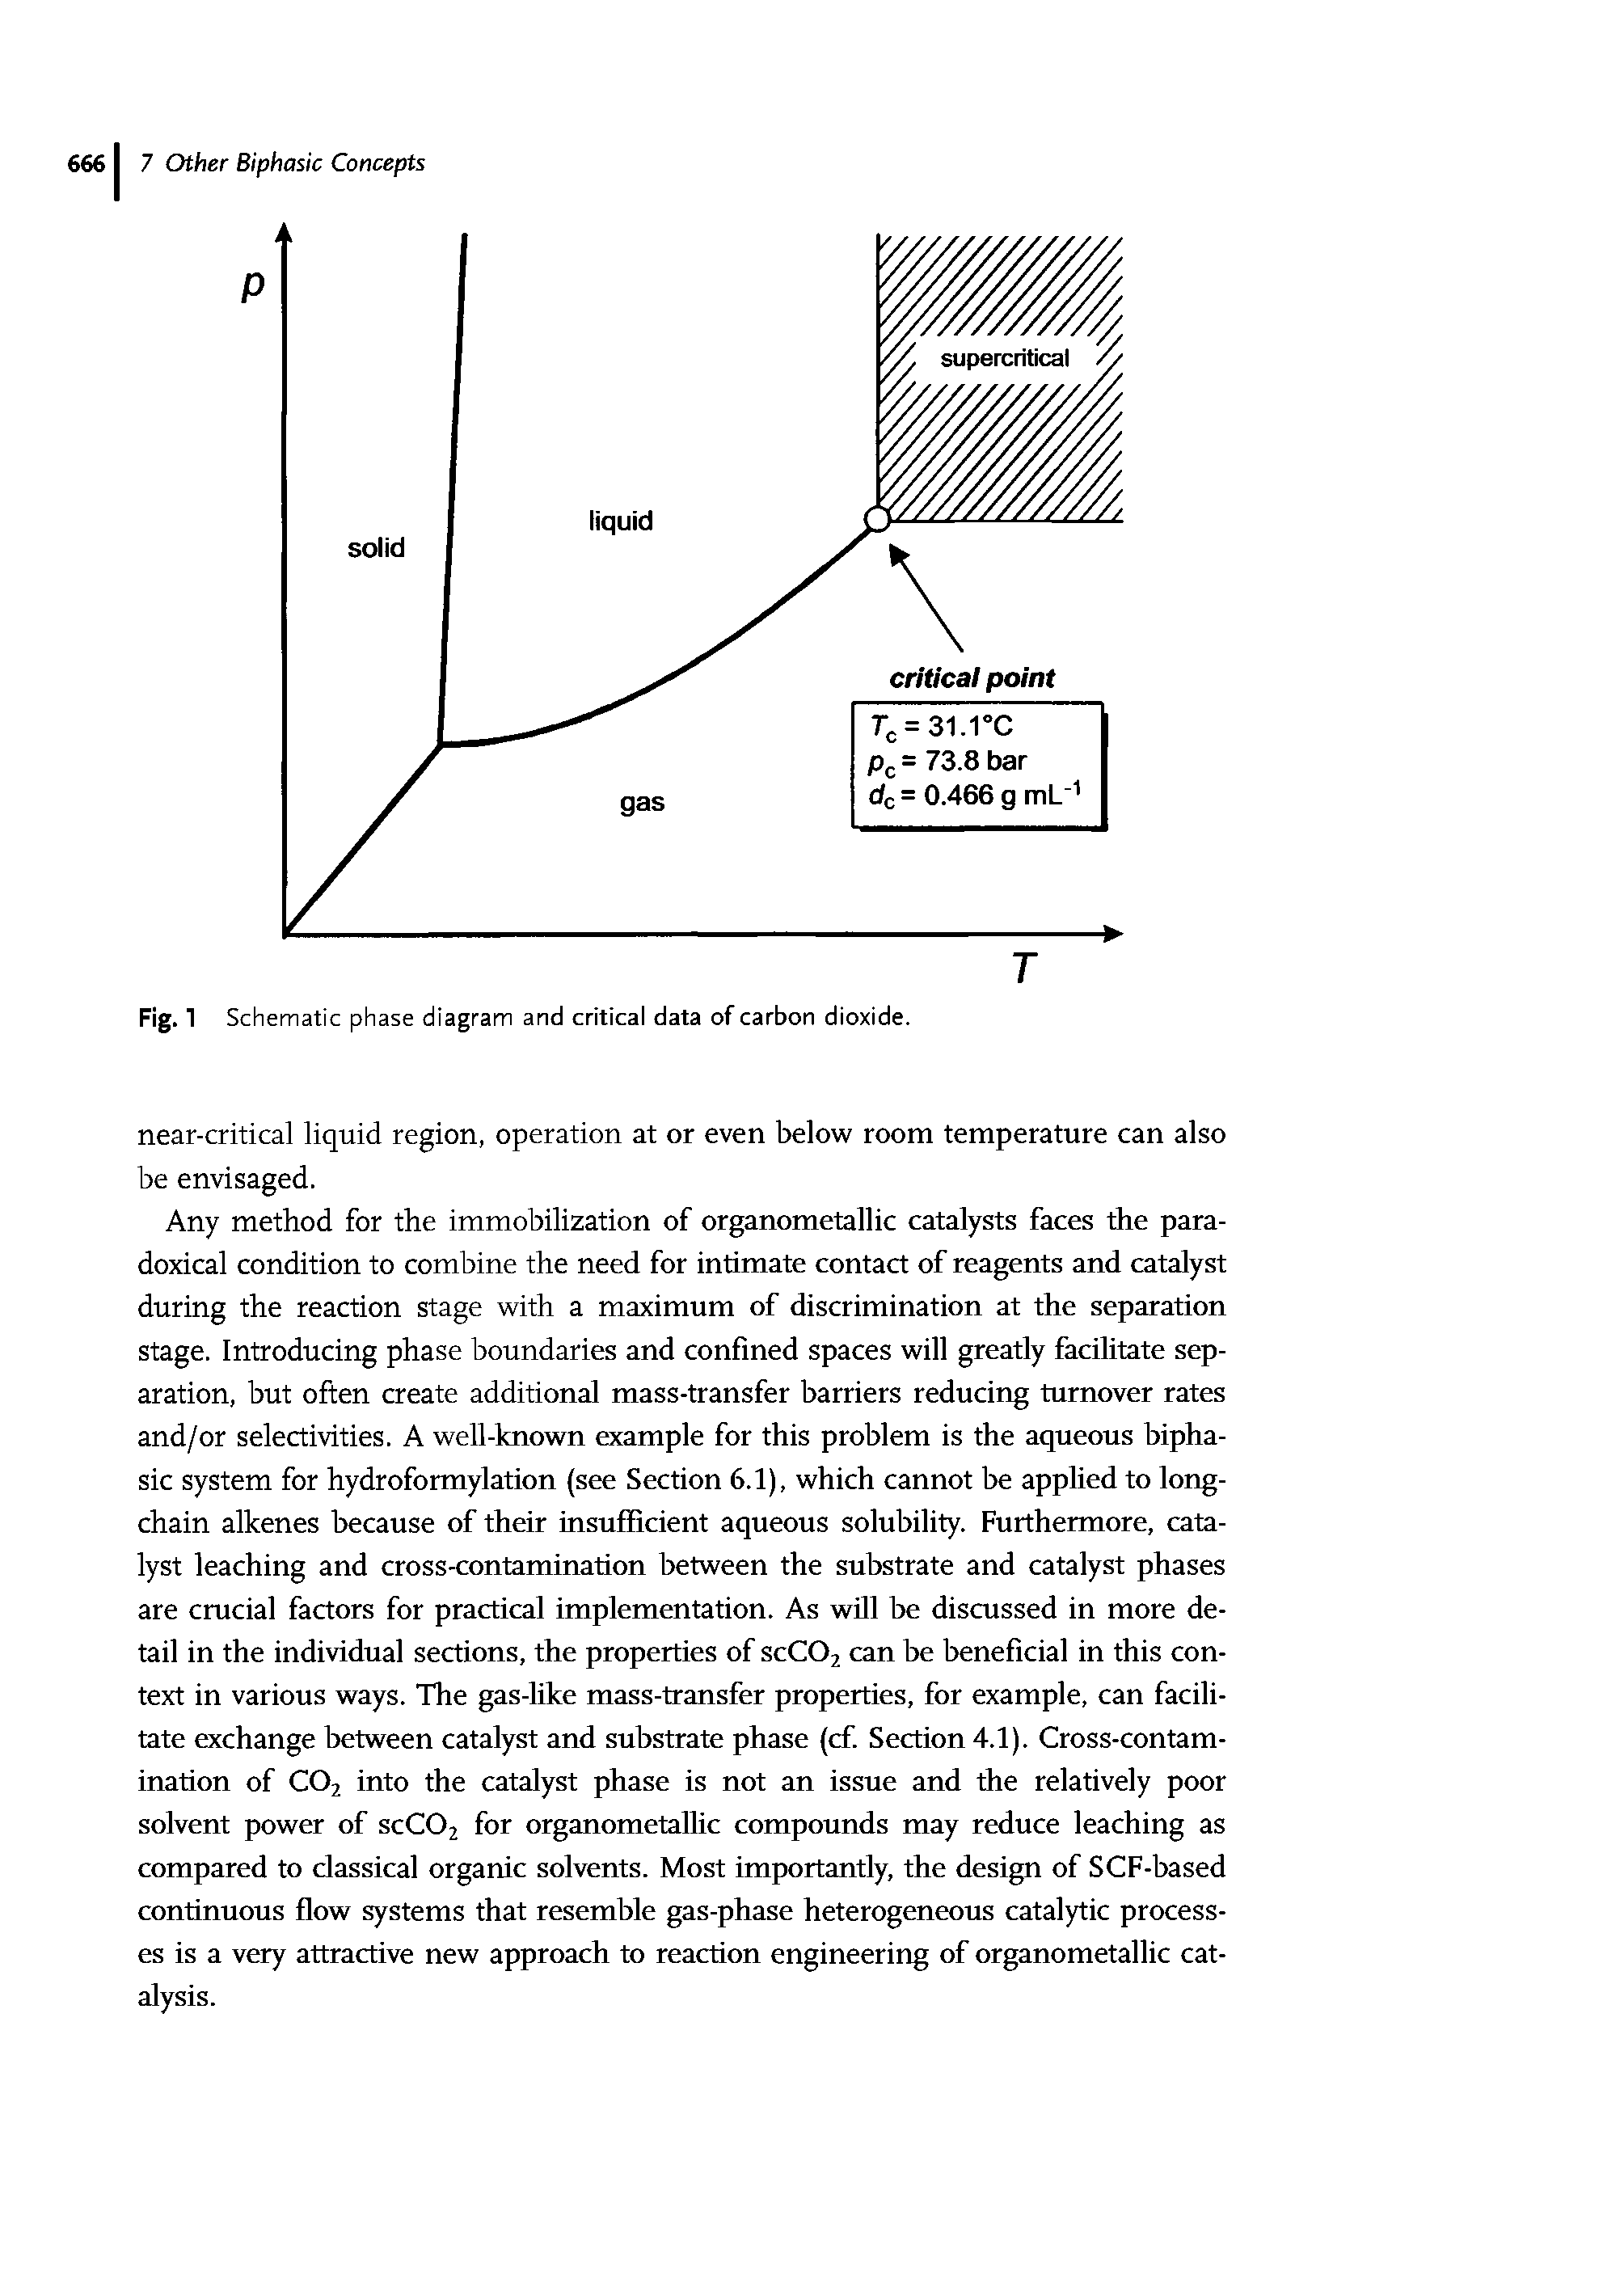 Fig. 1 Schematic phase diagram and critical data of carbon dioxide.